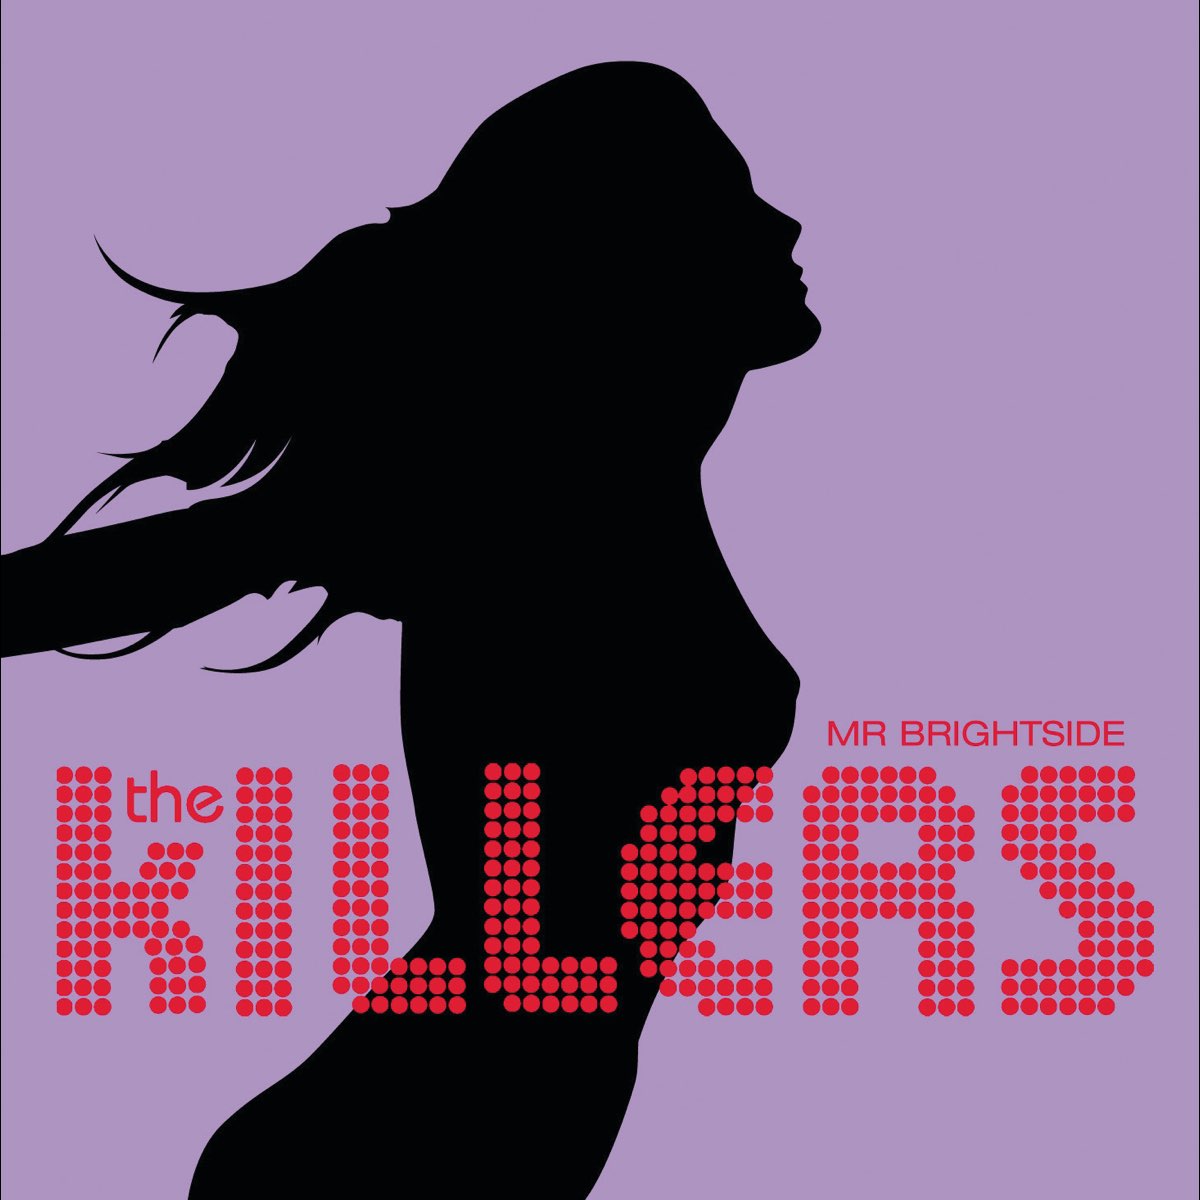 Single cover art for "Mr. Brightside" by The Killers